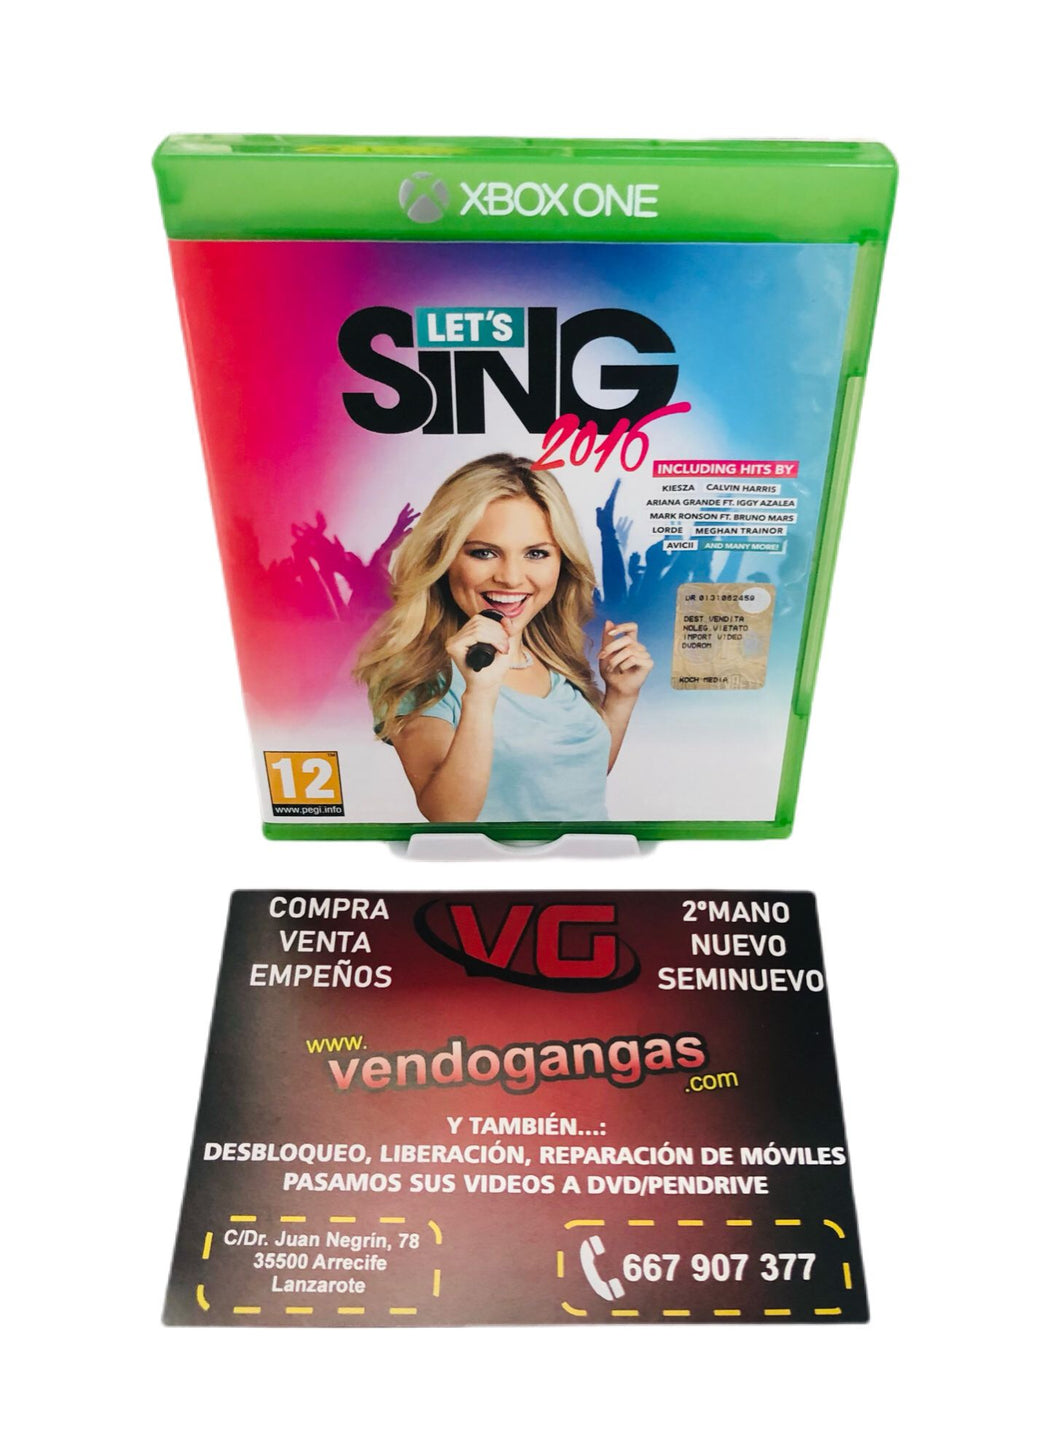 LETS SING 2016 MICROSOFT XBOX ONE